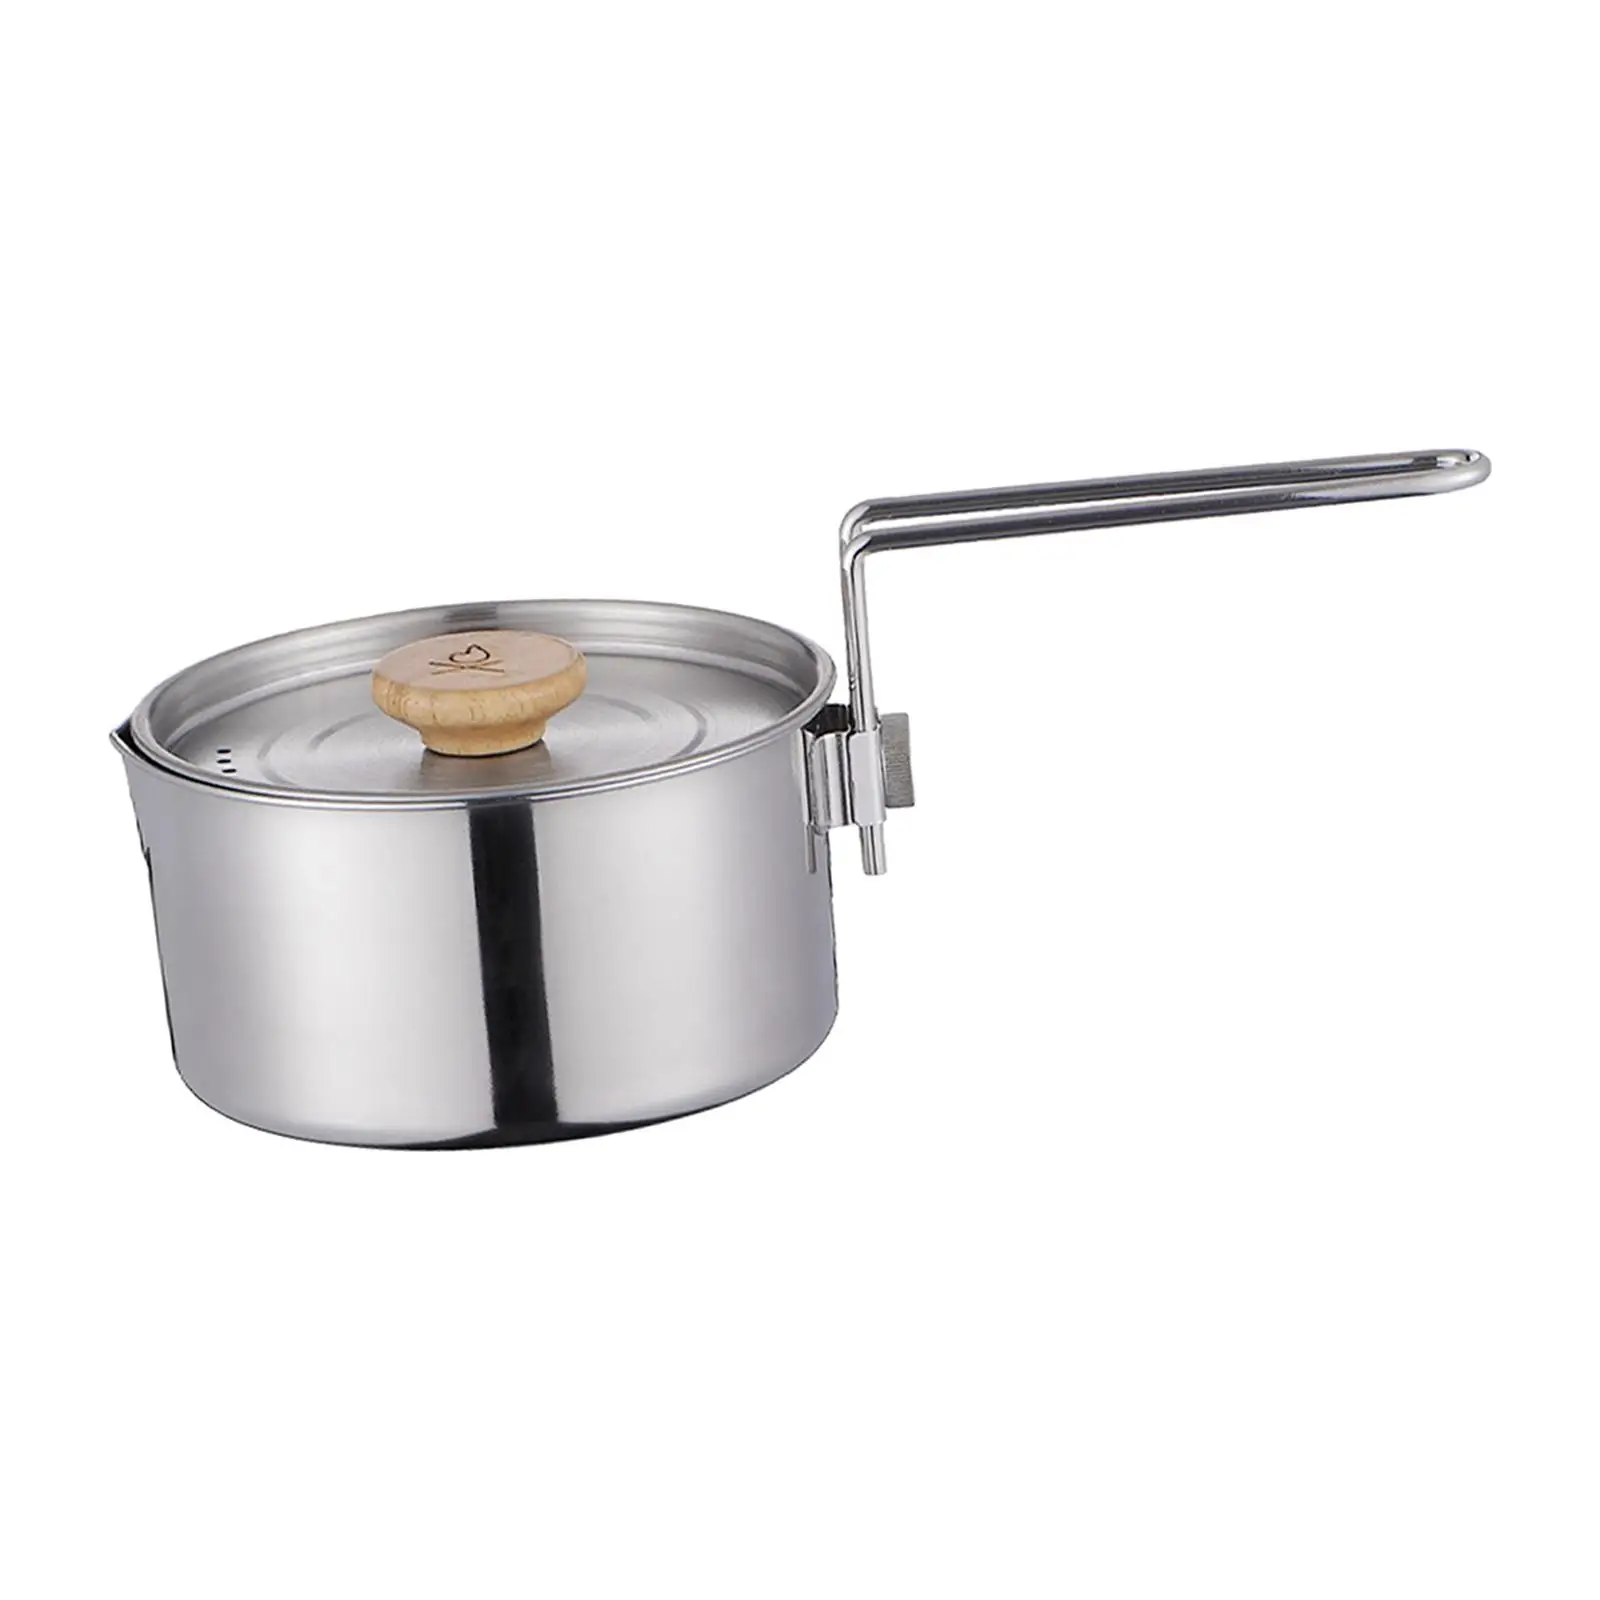 Stainless Steel Cooking Pot Water Kettle Campfire Kettle Camping Pot for Hiking Picnic